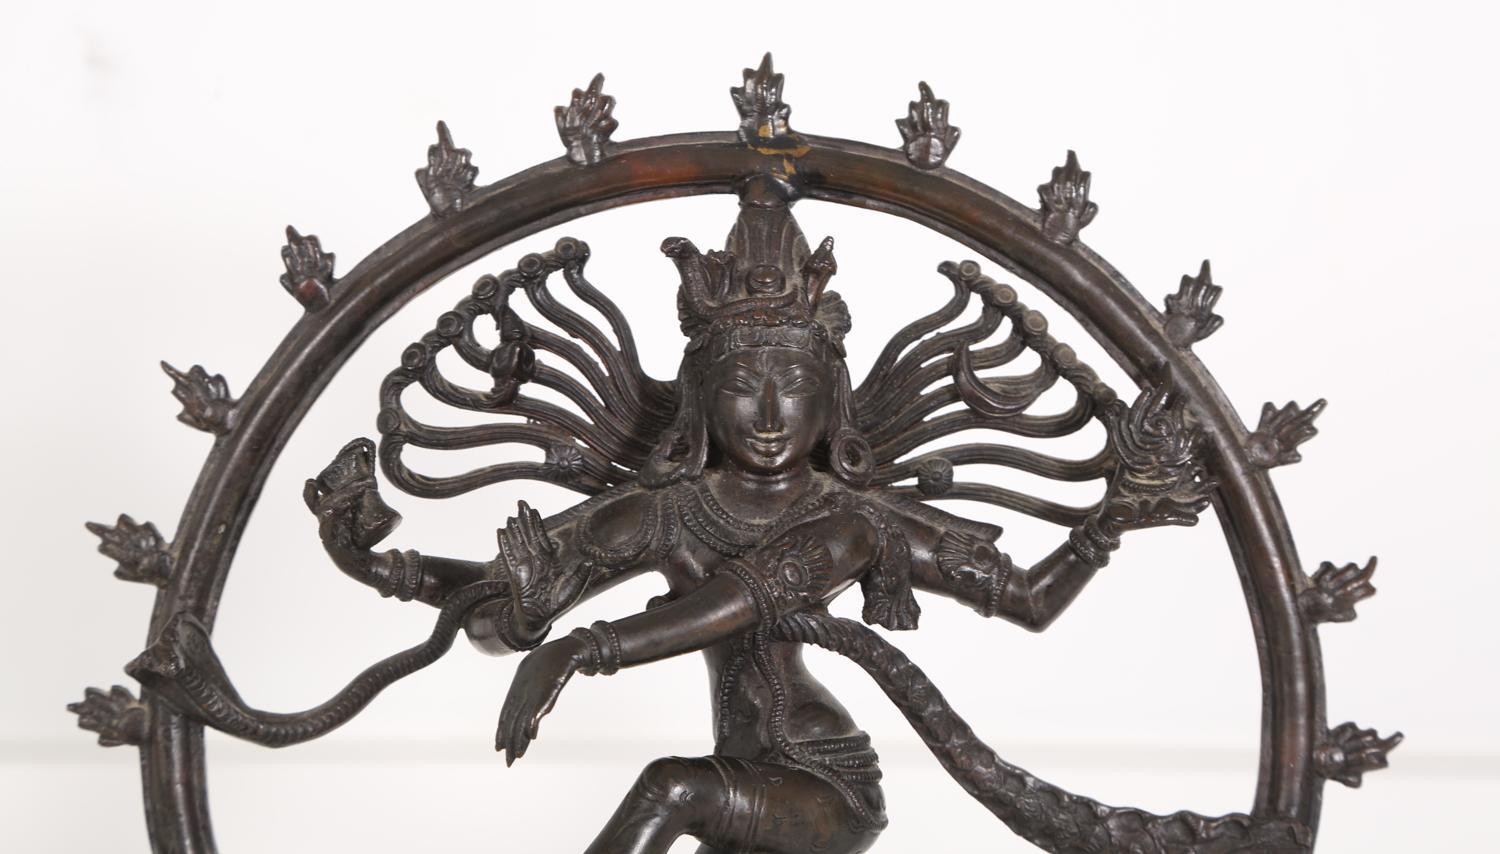 
Indian Bronze Figure of Shiva Nataraja 
A finely cast South Indian bronze figure of Shiva Nataraja, or Shiva as Lord of the Dance,  late 19th or early 20th century.
Shiva is portrayed here as Nataraja, the Lord of the Dance, symbolically combining